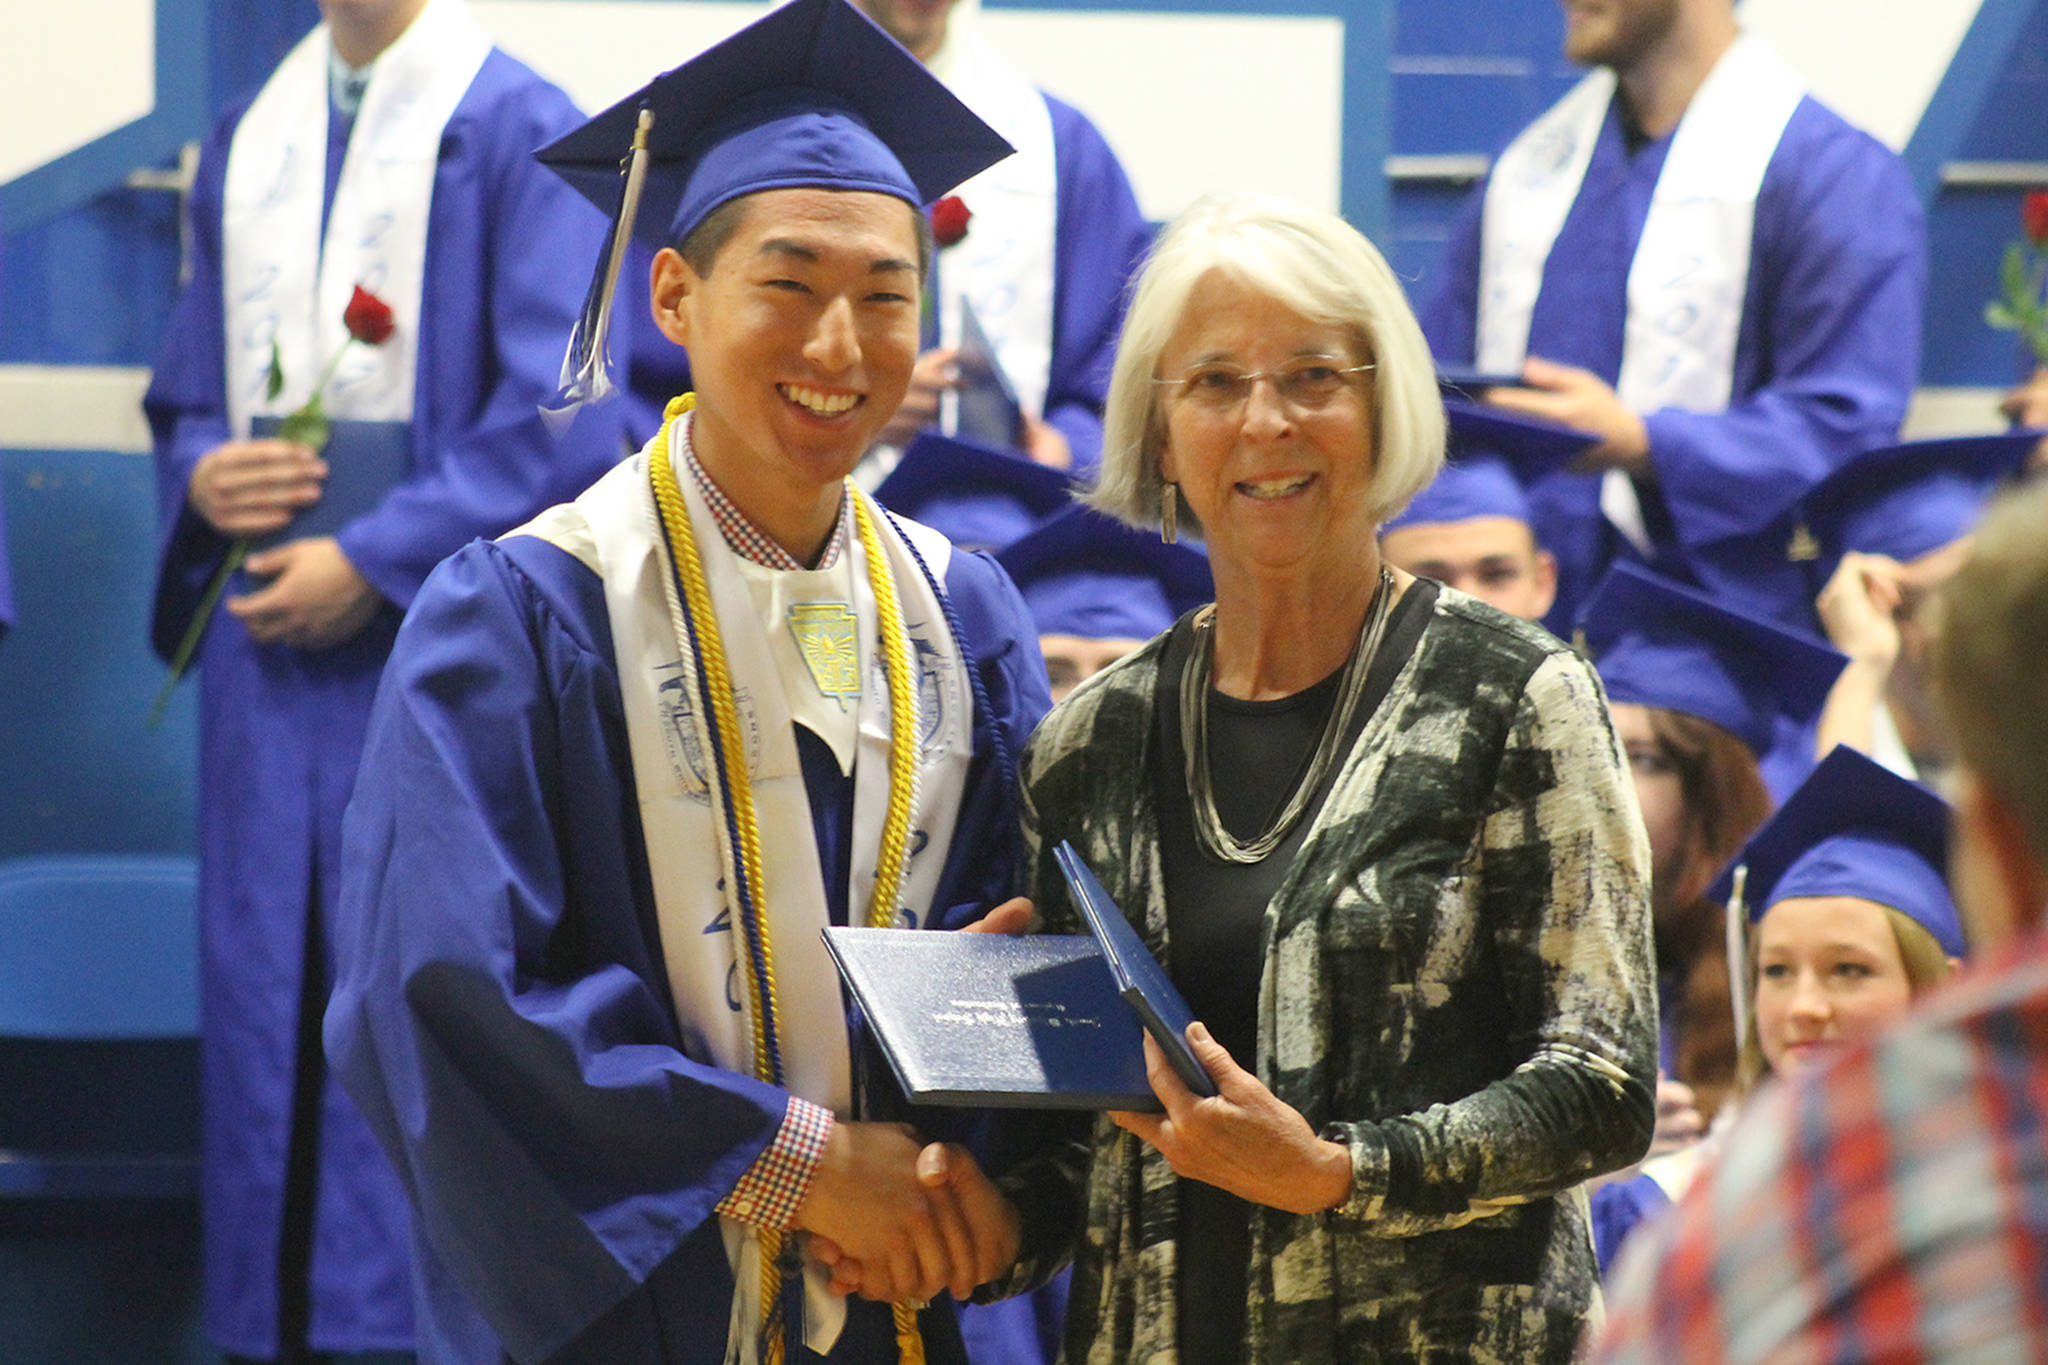 Local donors give over $150,000 in scholarships to recent grads